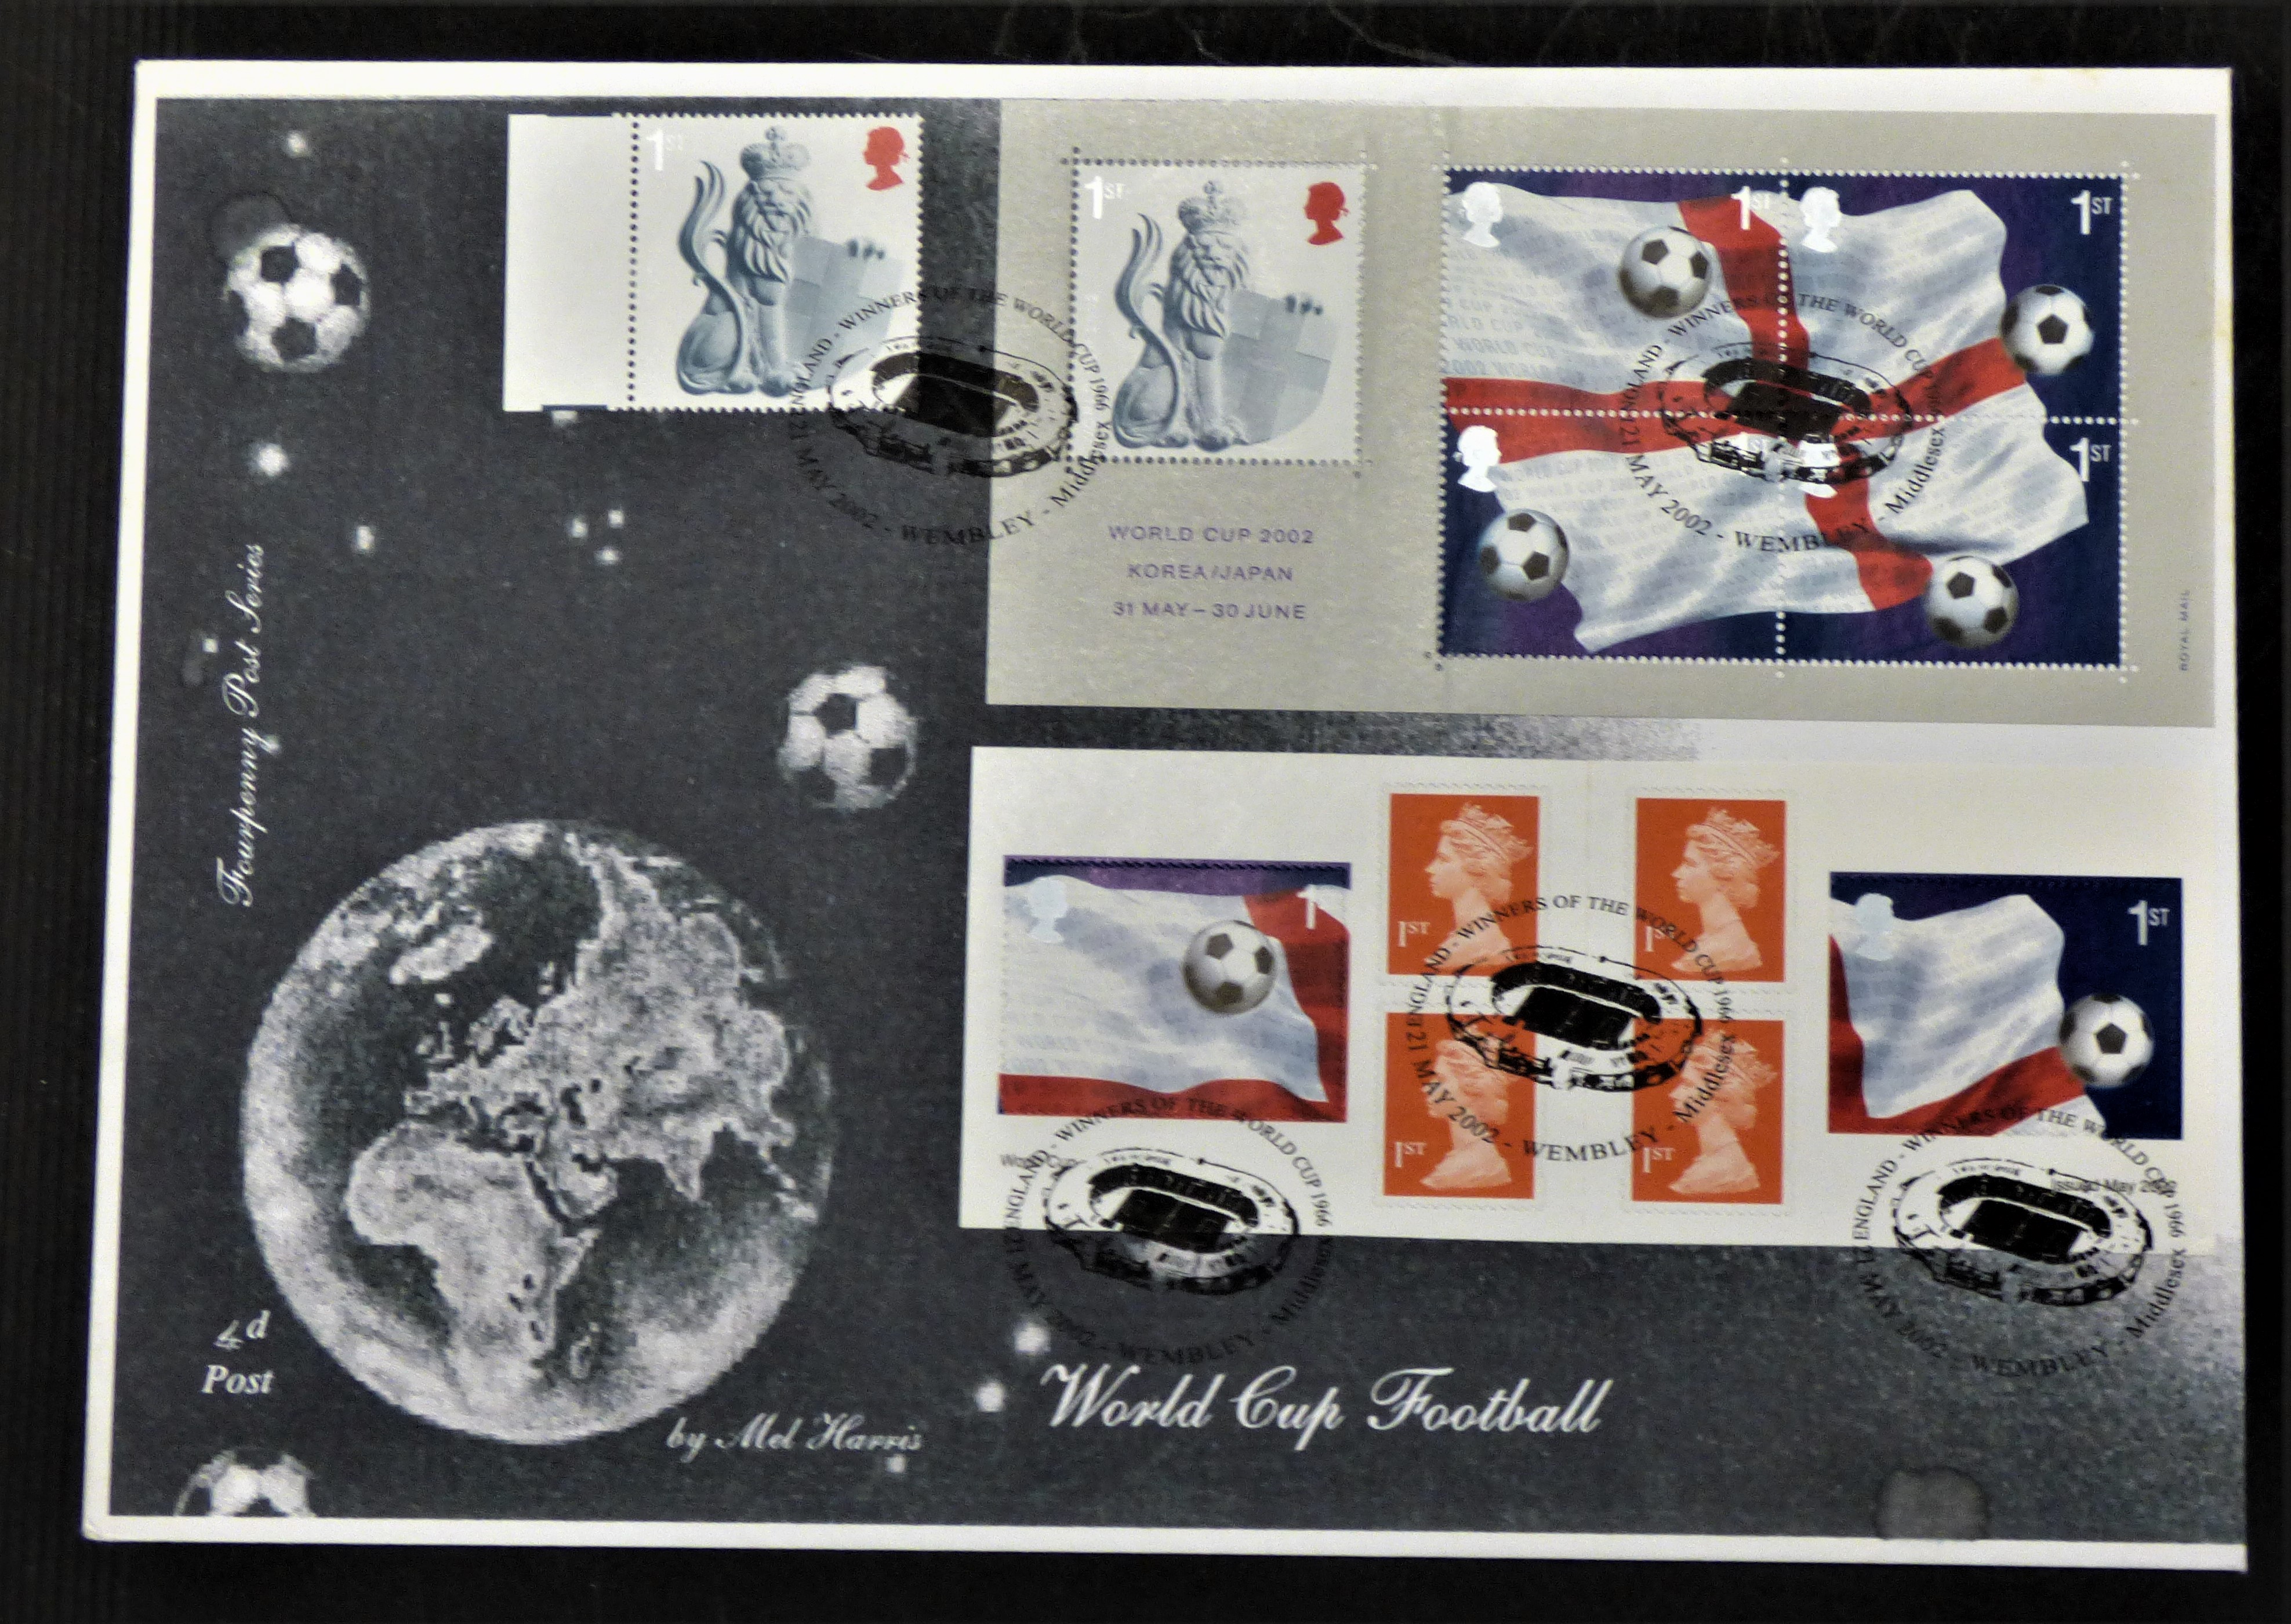 Great Britain 2002 (21 May) World Cup Football large superb FDC, Wembley FDC on Booklet Pane and Min